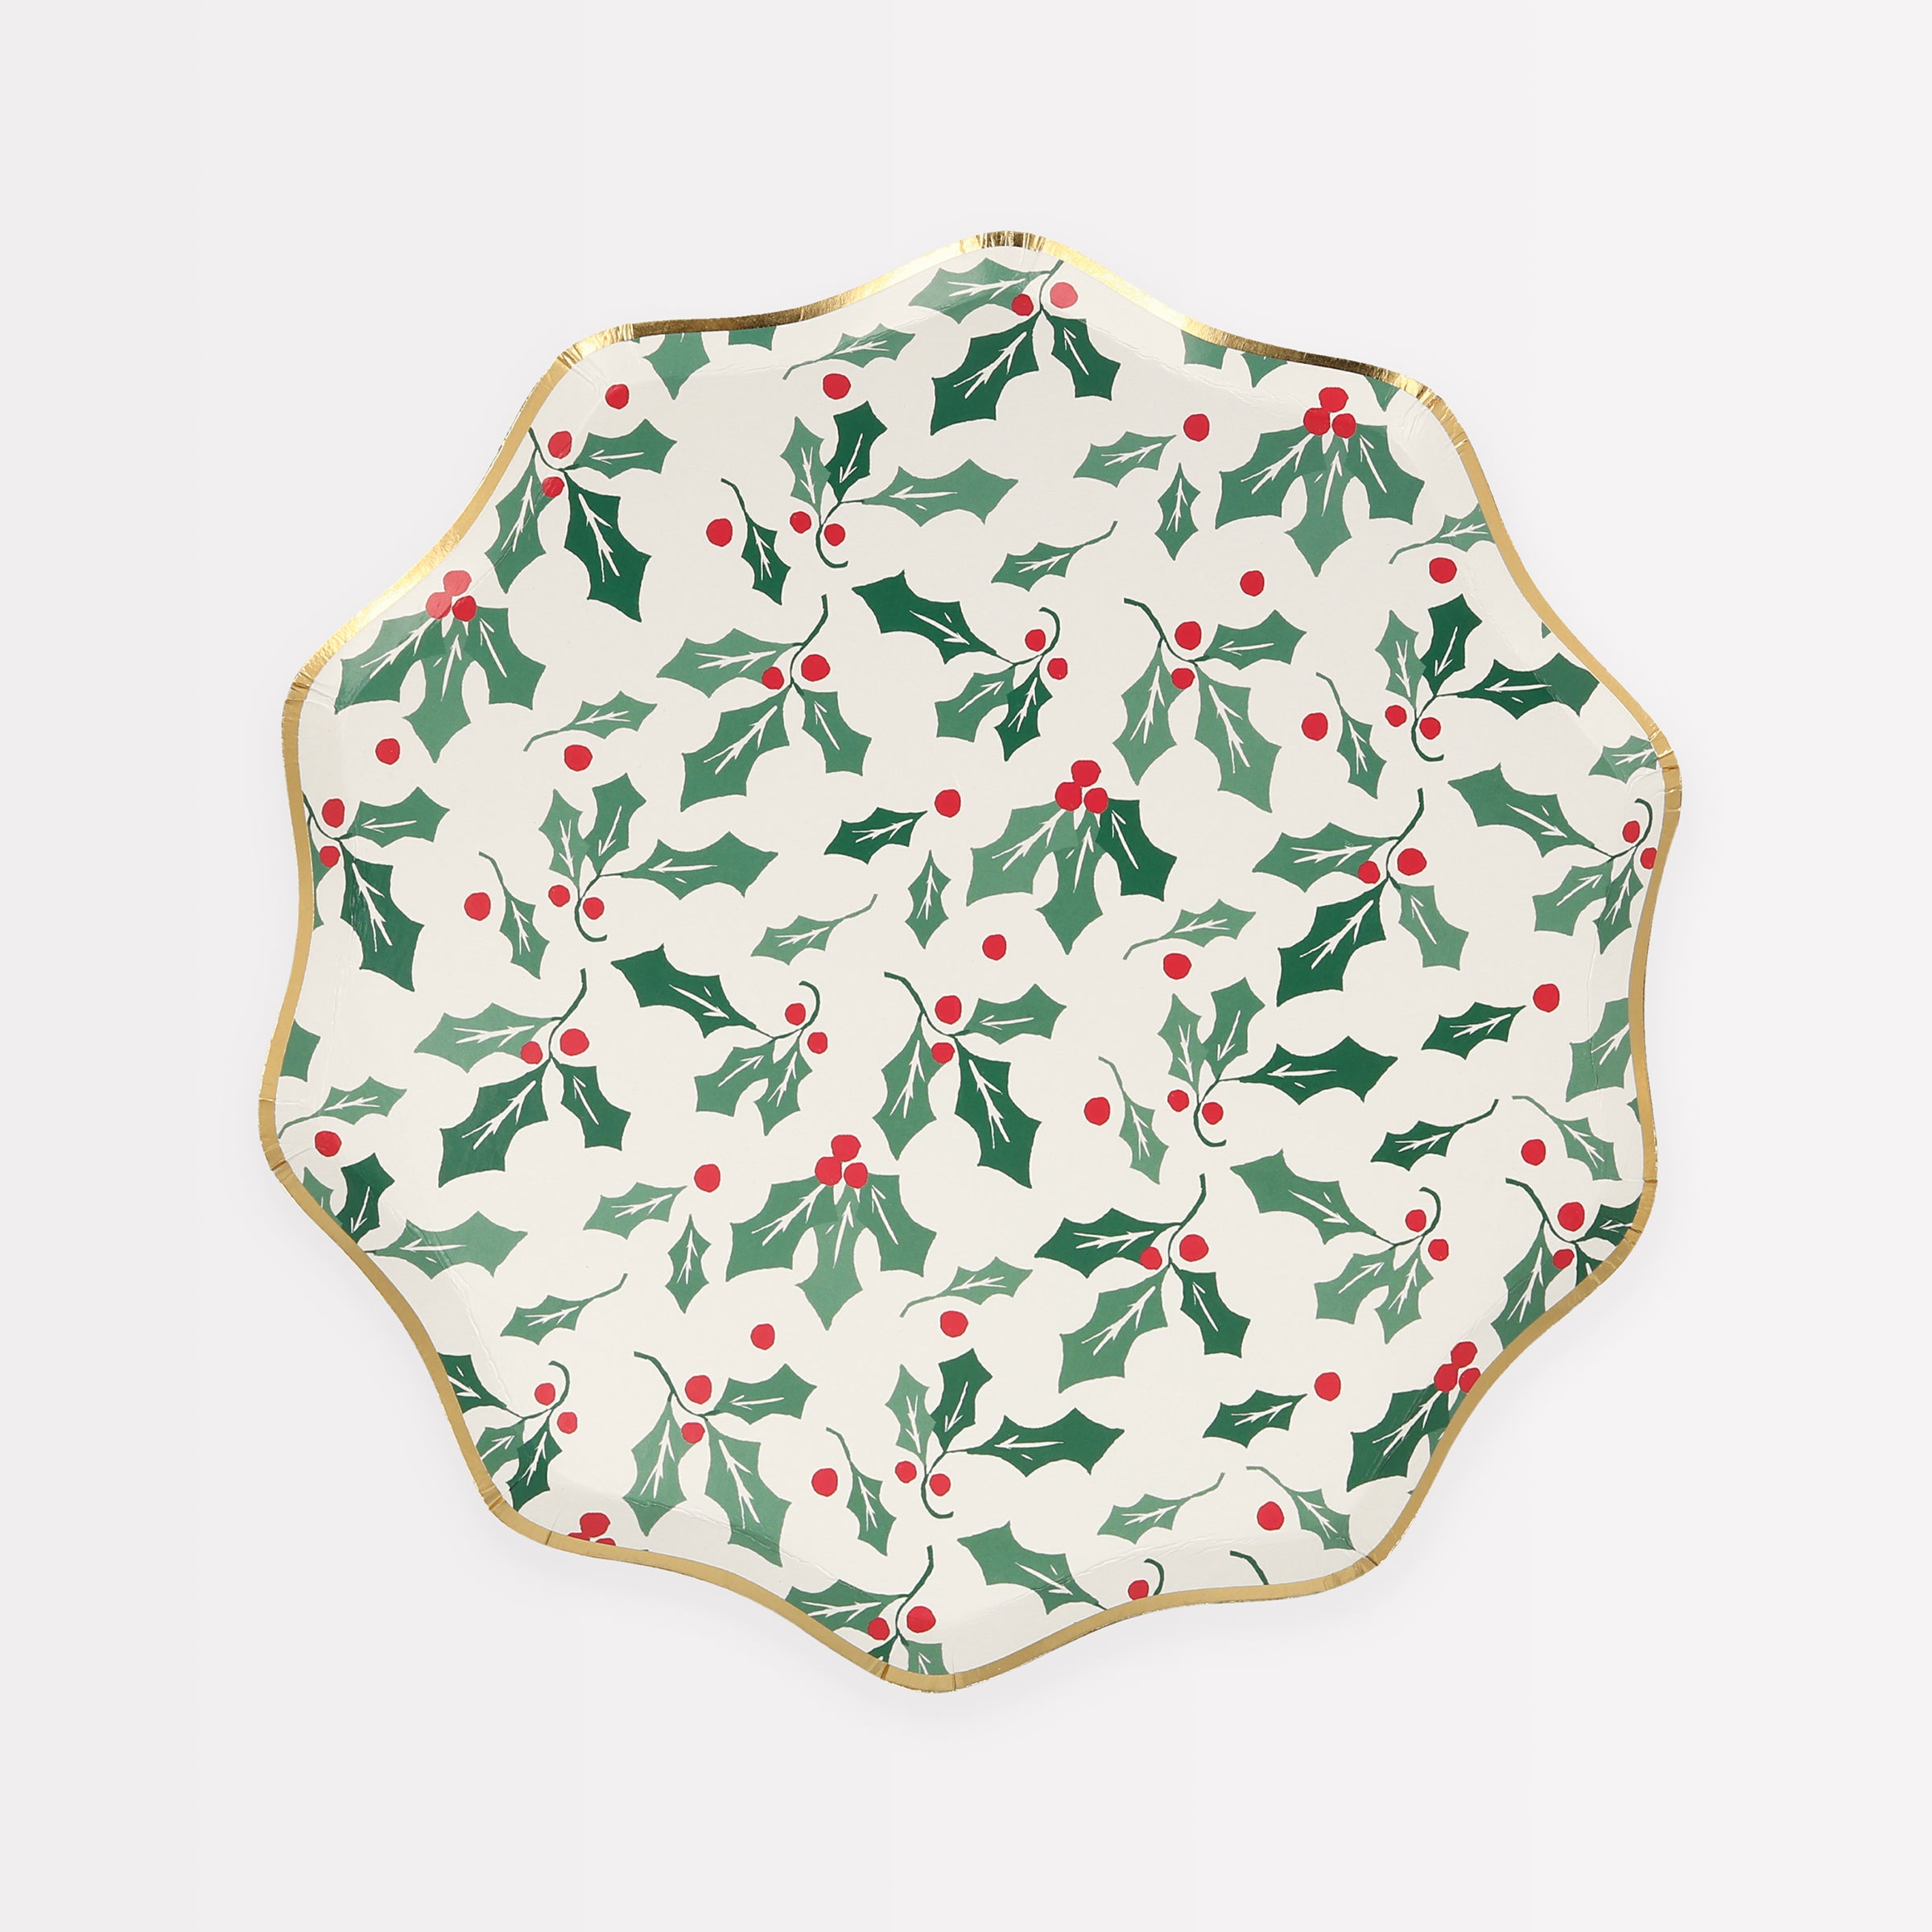 Our small plates with a holly design are the perfect paper plates for a Christmas party.